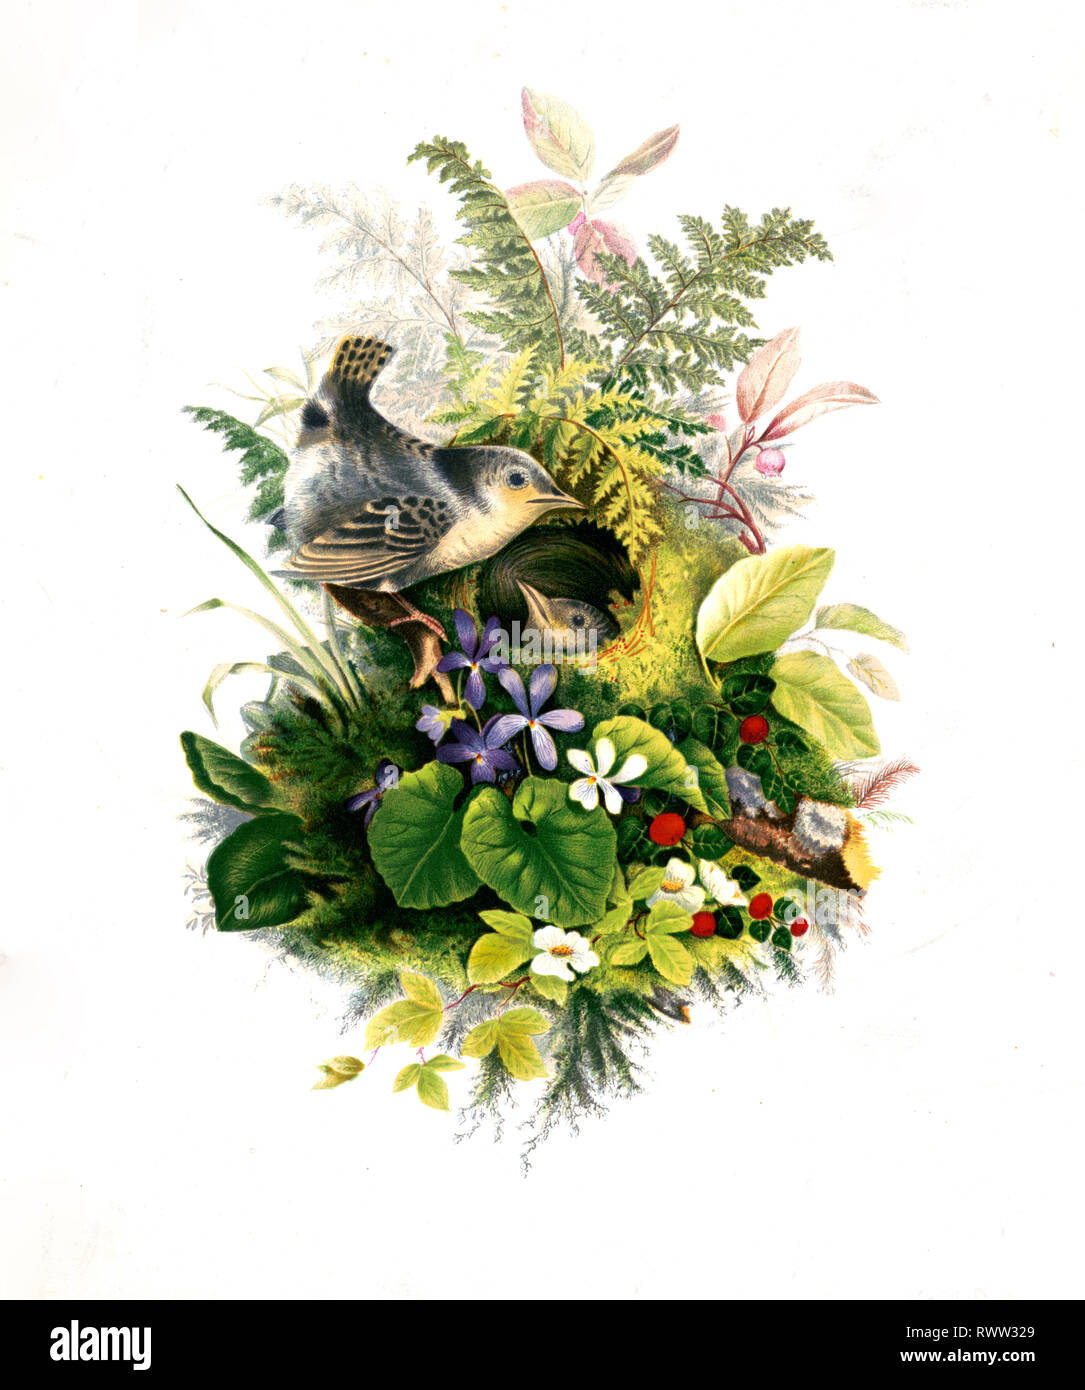 19th century illustrations - Print shows two wrens at a nest with ferns and other plants and leaves around it; it may be made of moss. (Wren's Nest) Stock Photo